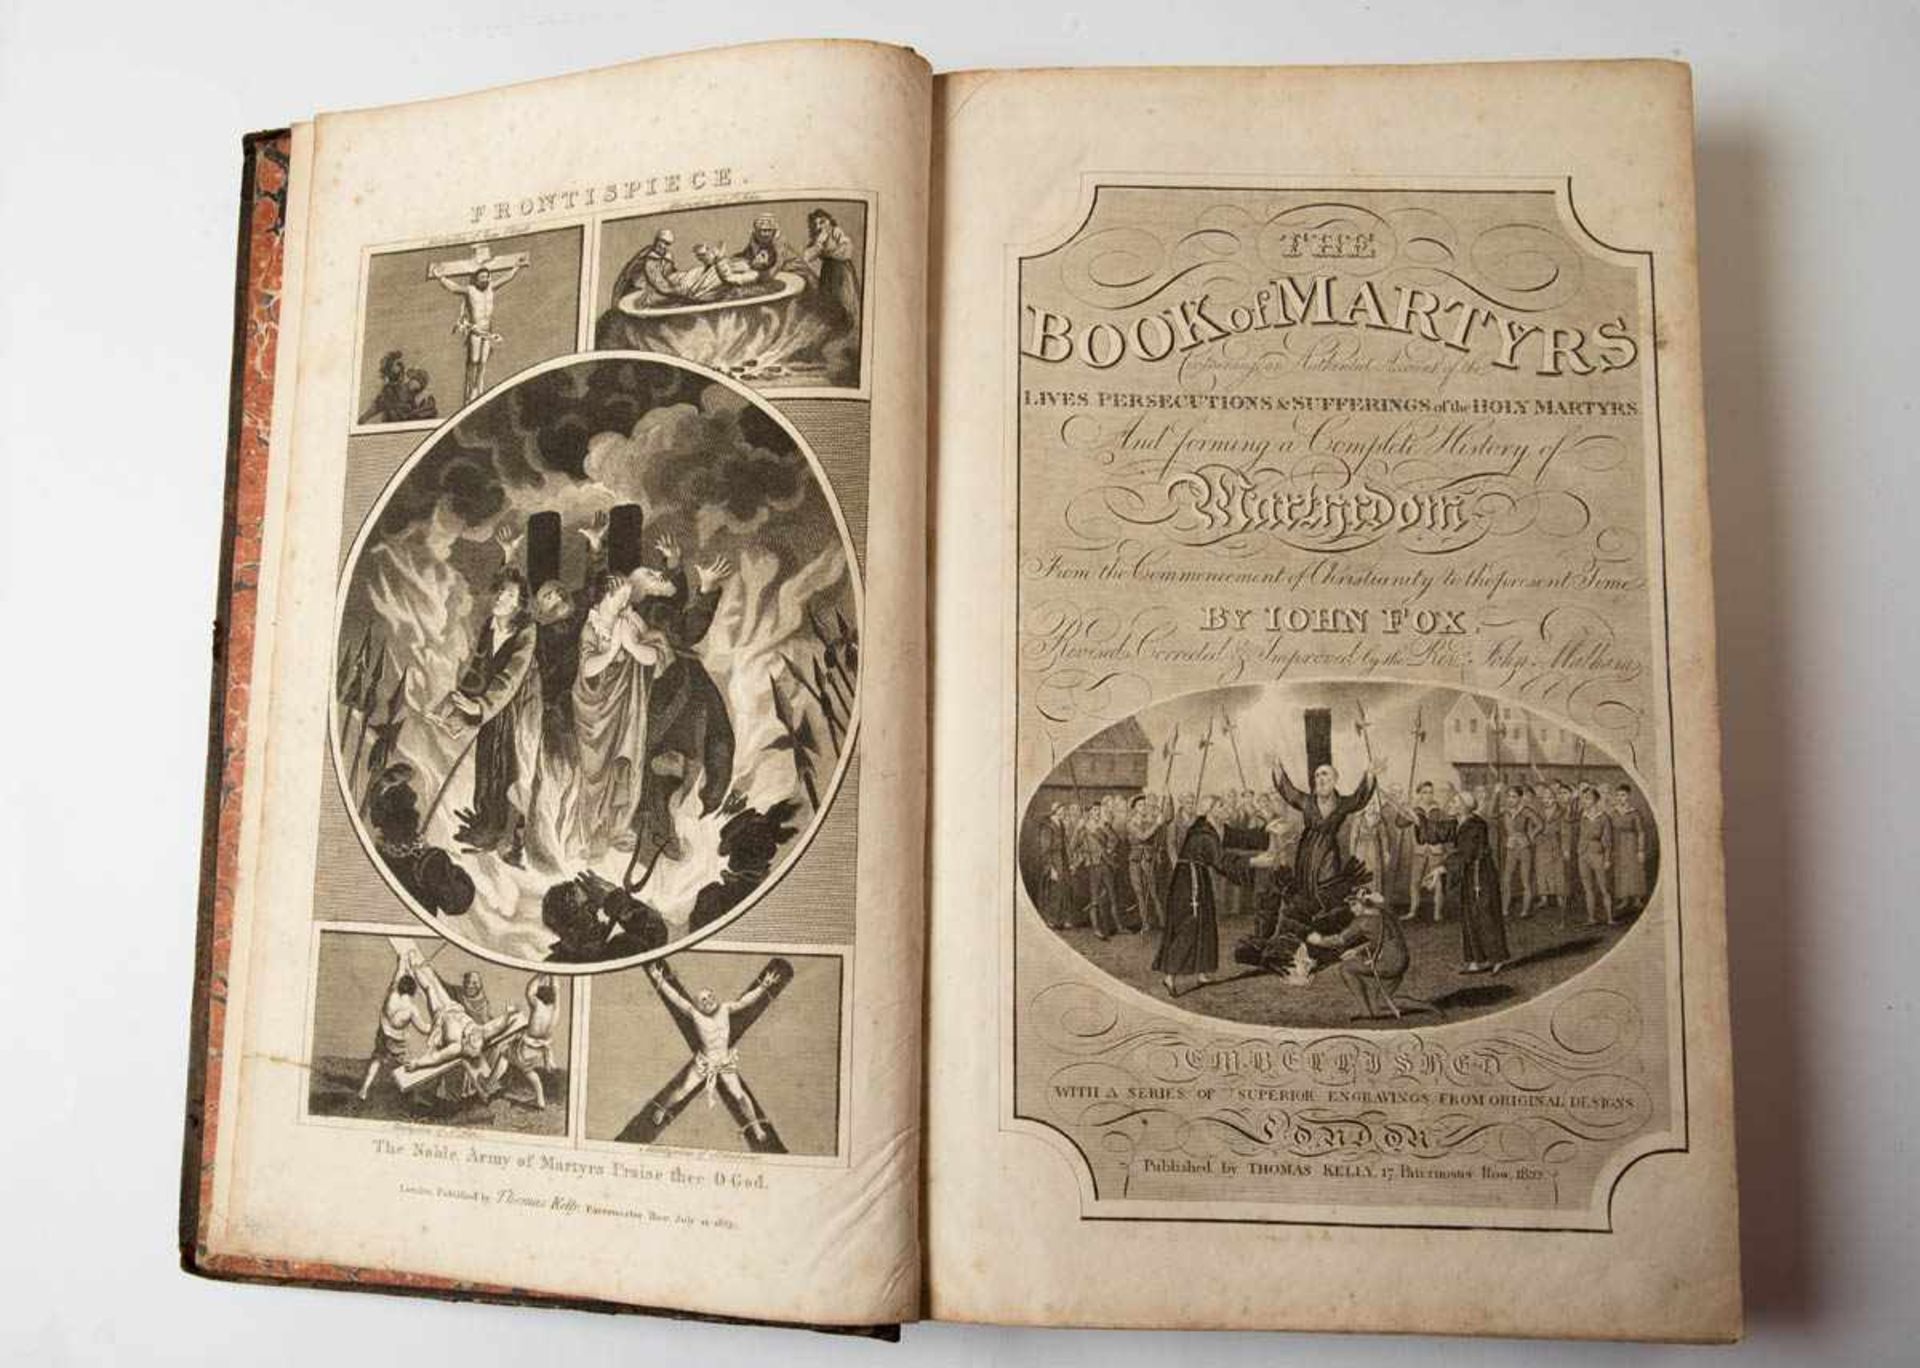 Book of Martyrs, London 1823 Lives, Persecutions & Suffrerings of the Holy Martyrs. Publiziert und